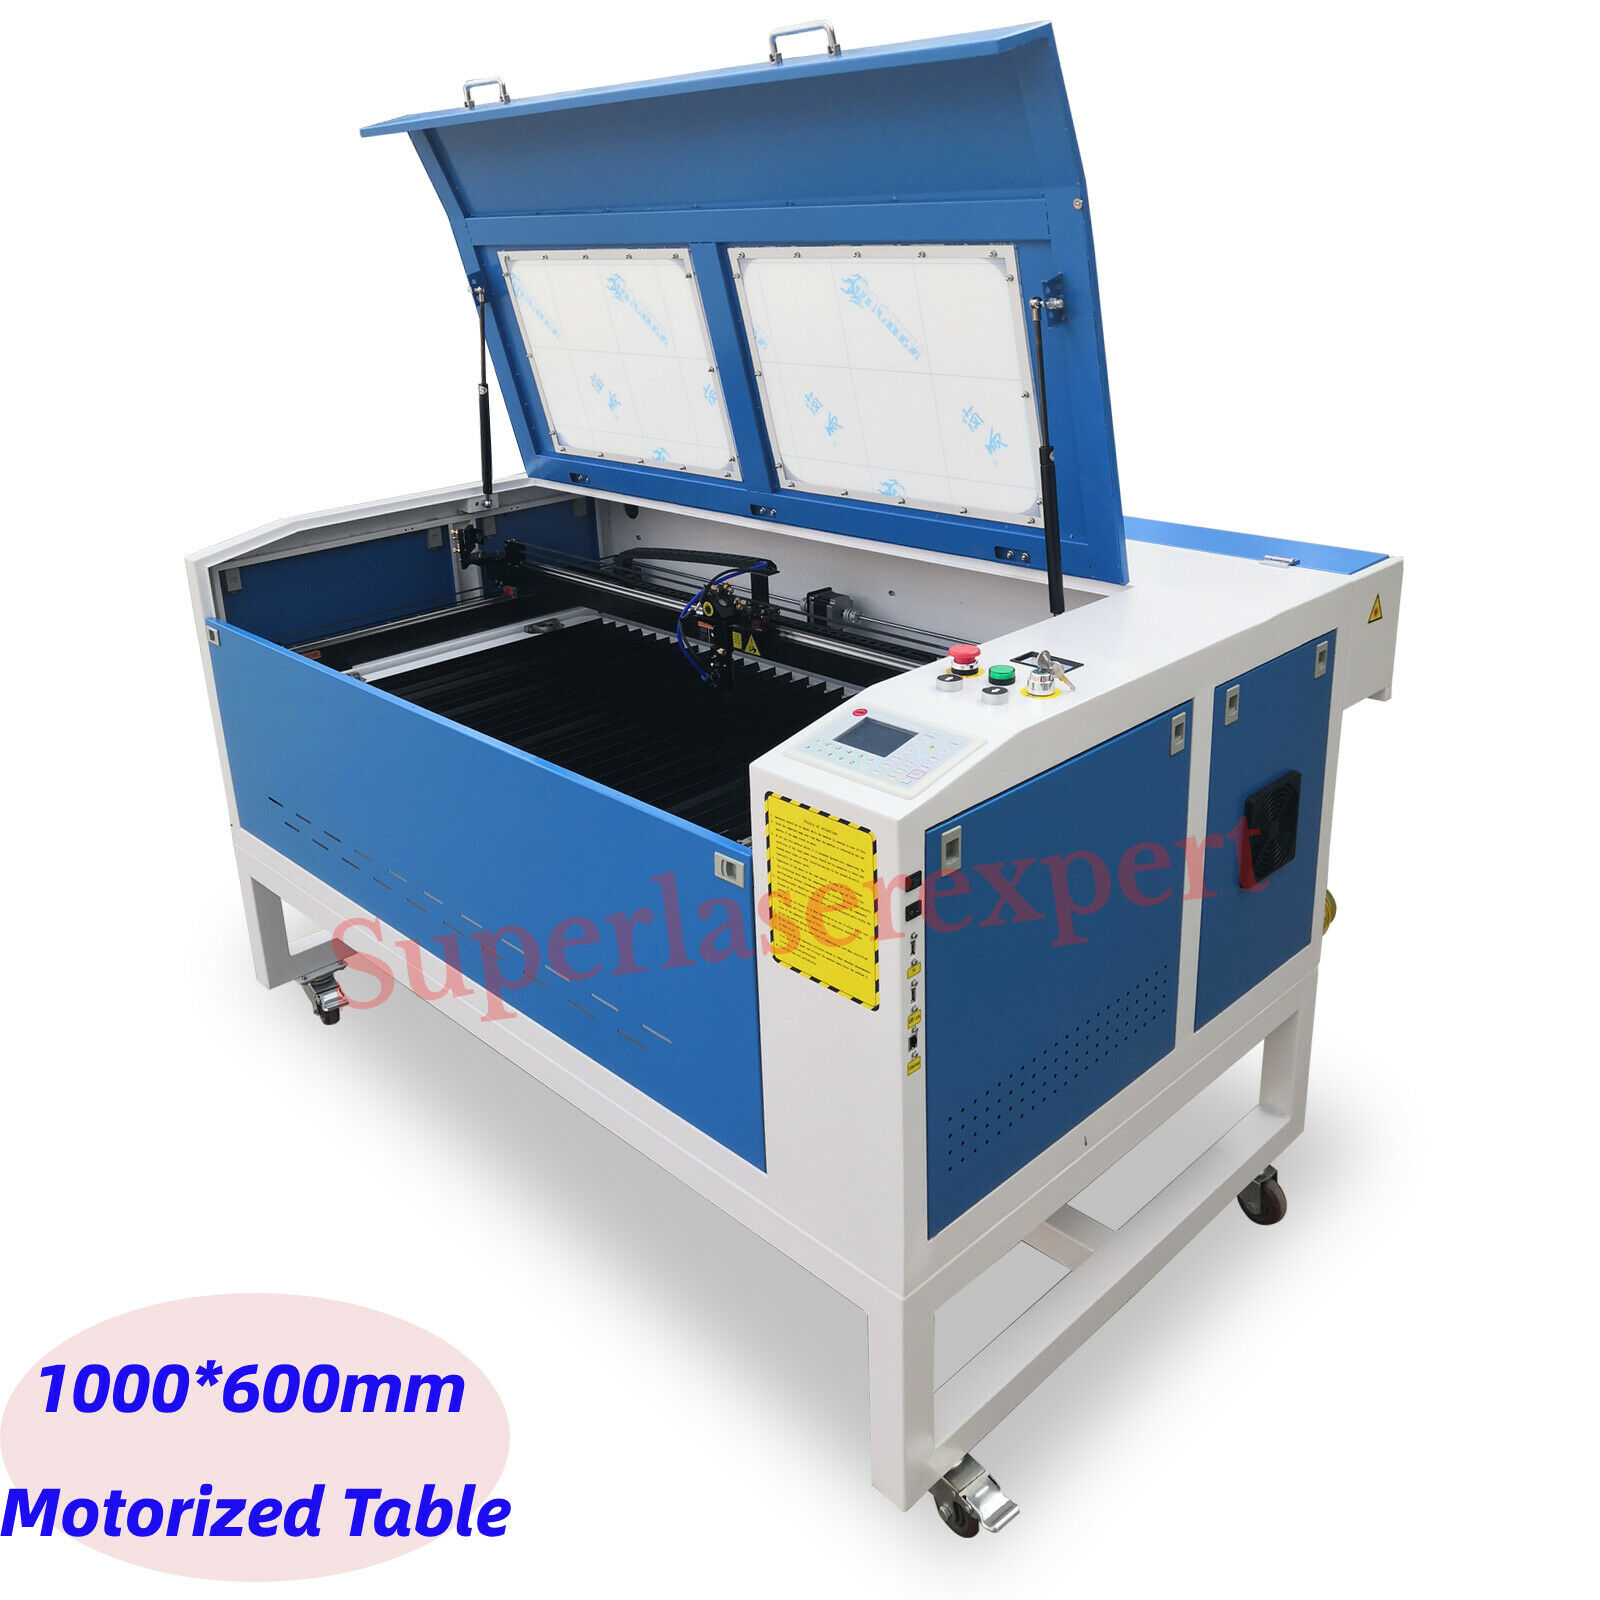 New!!  80w Co2 Laser Cutting&engraving Machine 1000*600mm With Motorized Table